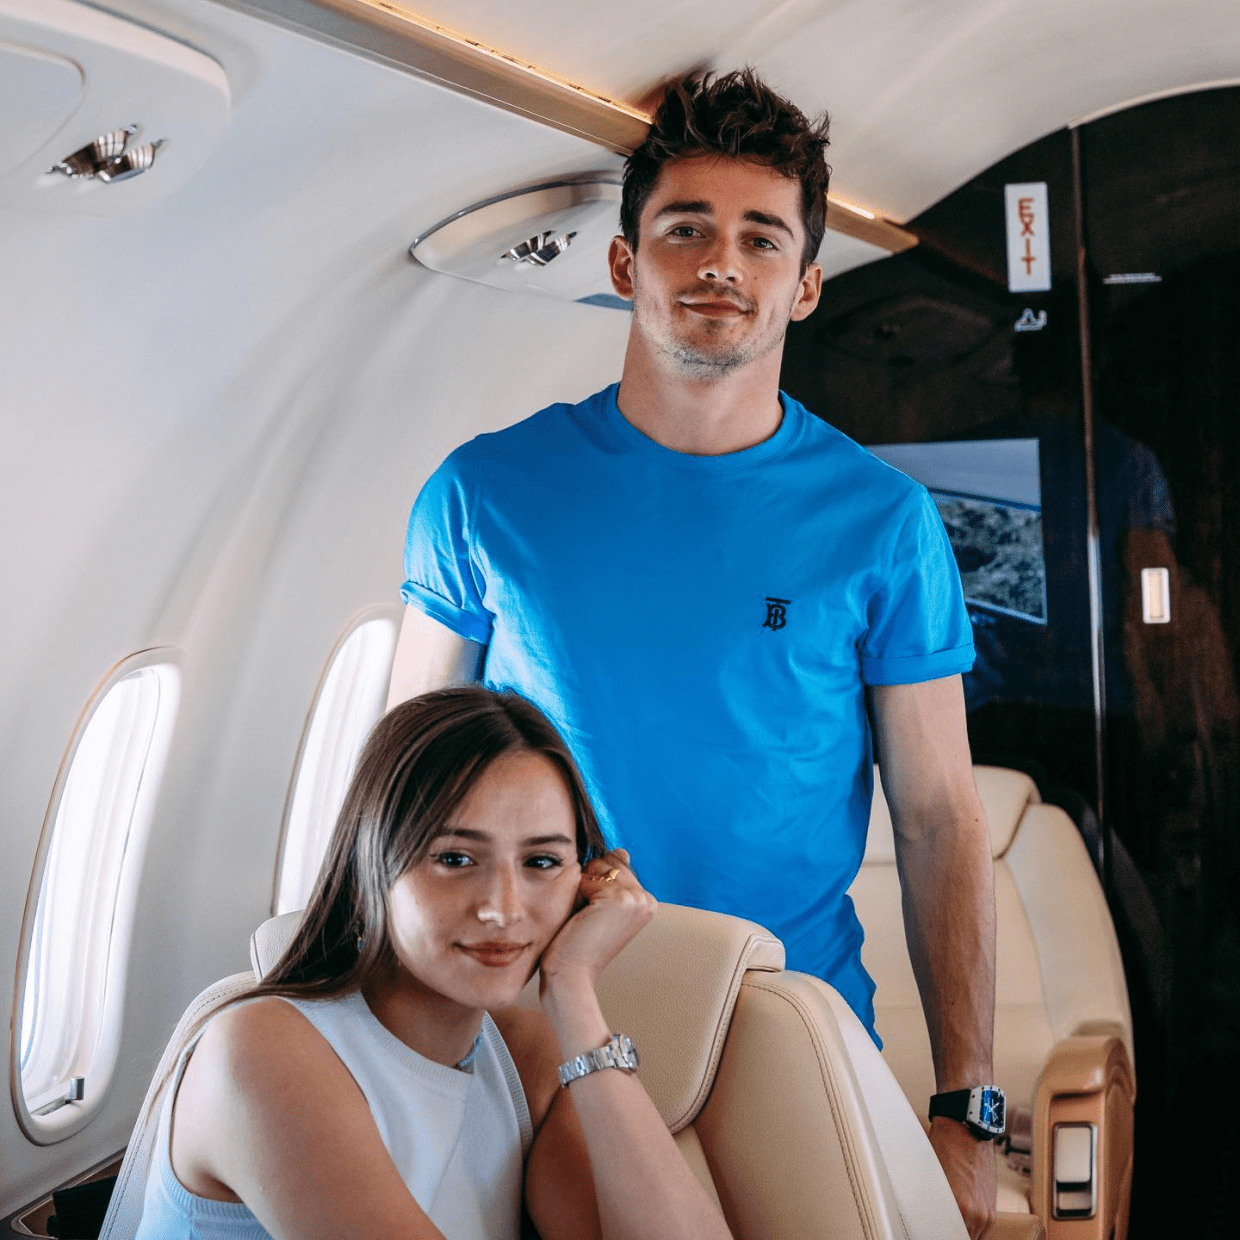 Formula 1: All you want to know about Formula 1’s new WONDER BOY Charles Leclerc, his salary, F1 earnings, glamorous lifestyle, and his stunning girlfriend